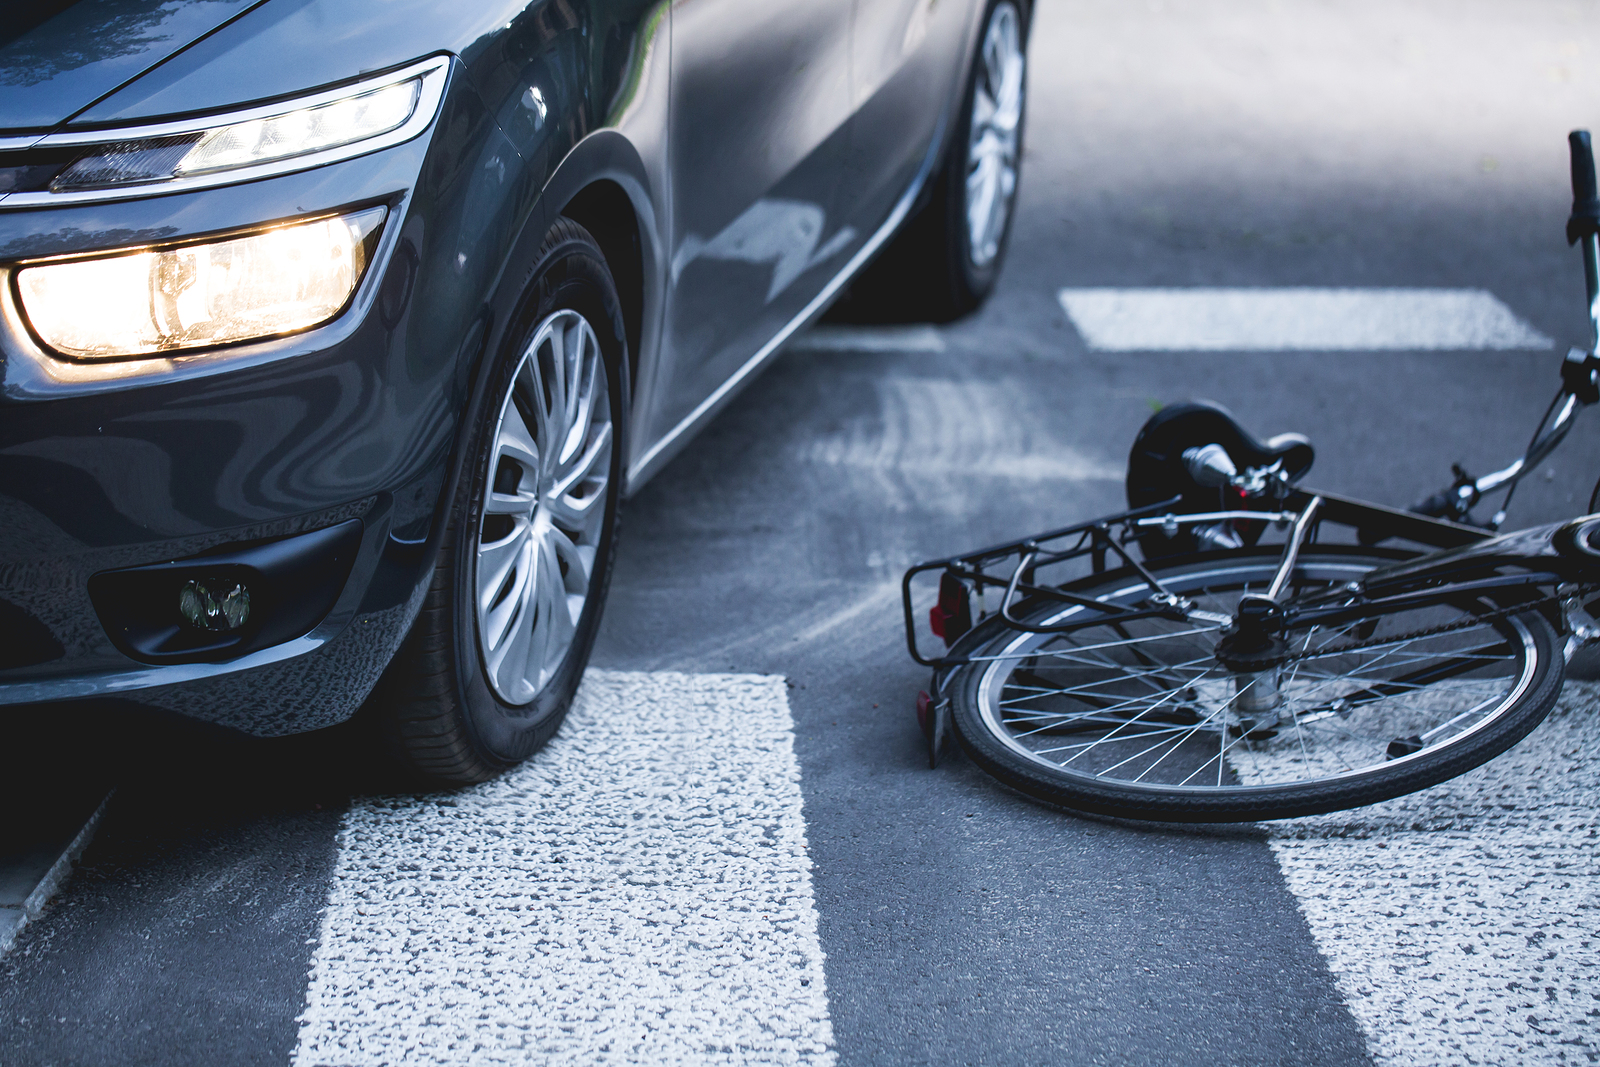 Bicycle Accident With No Helmet? Here Are Some Legal Considerations